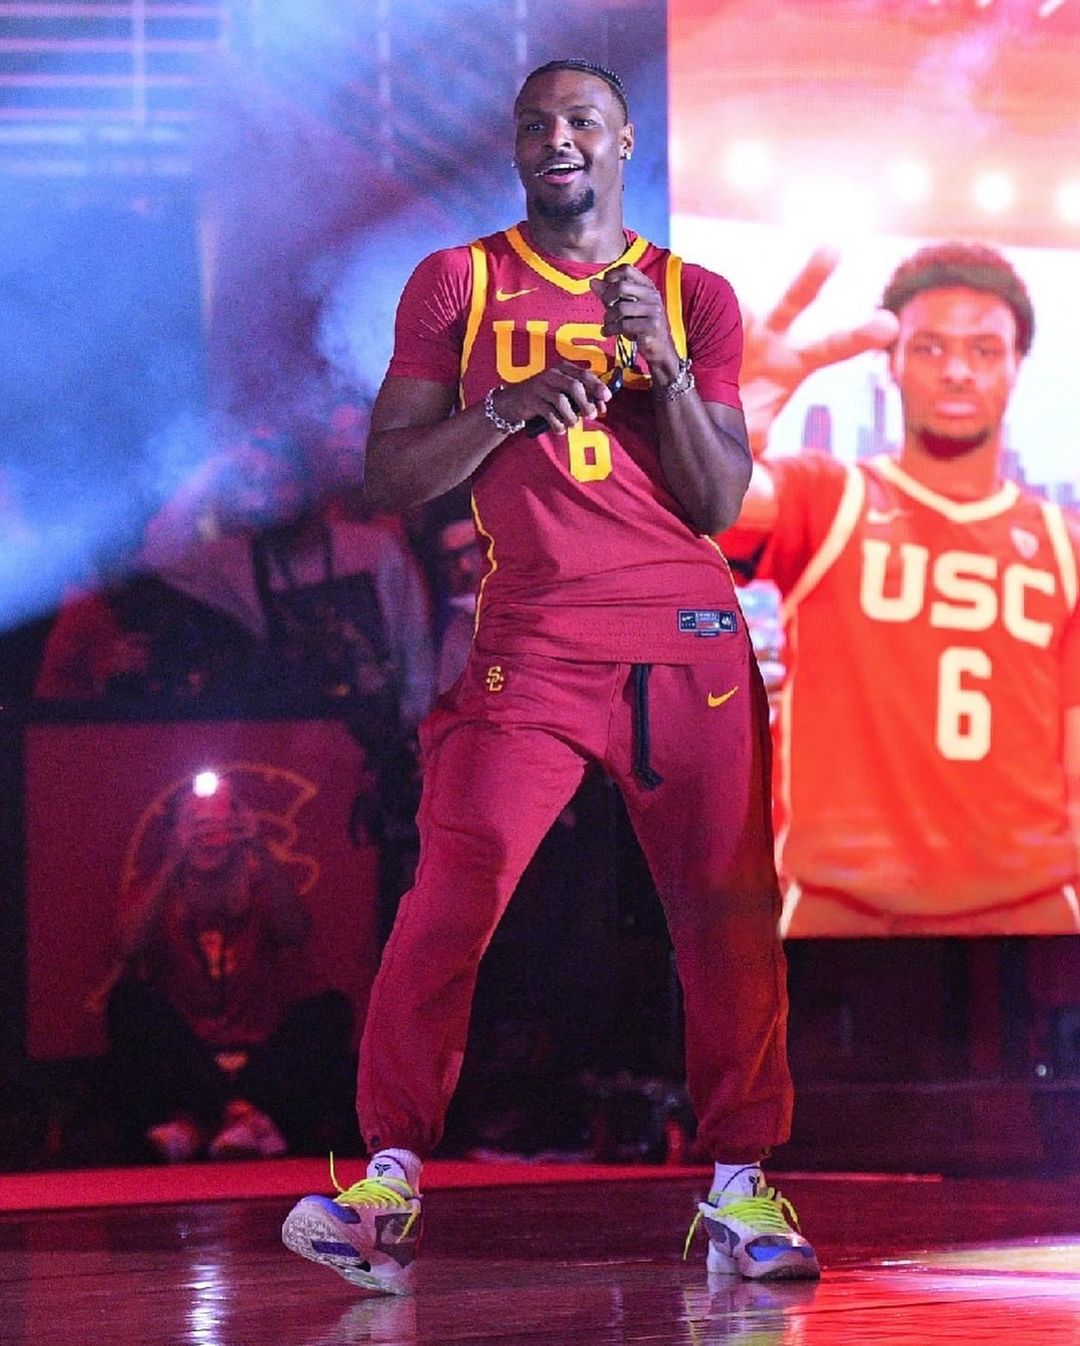 KING OF THE DANCE! On USC's basketball season opener, Bronny James danced with the team but did not play